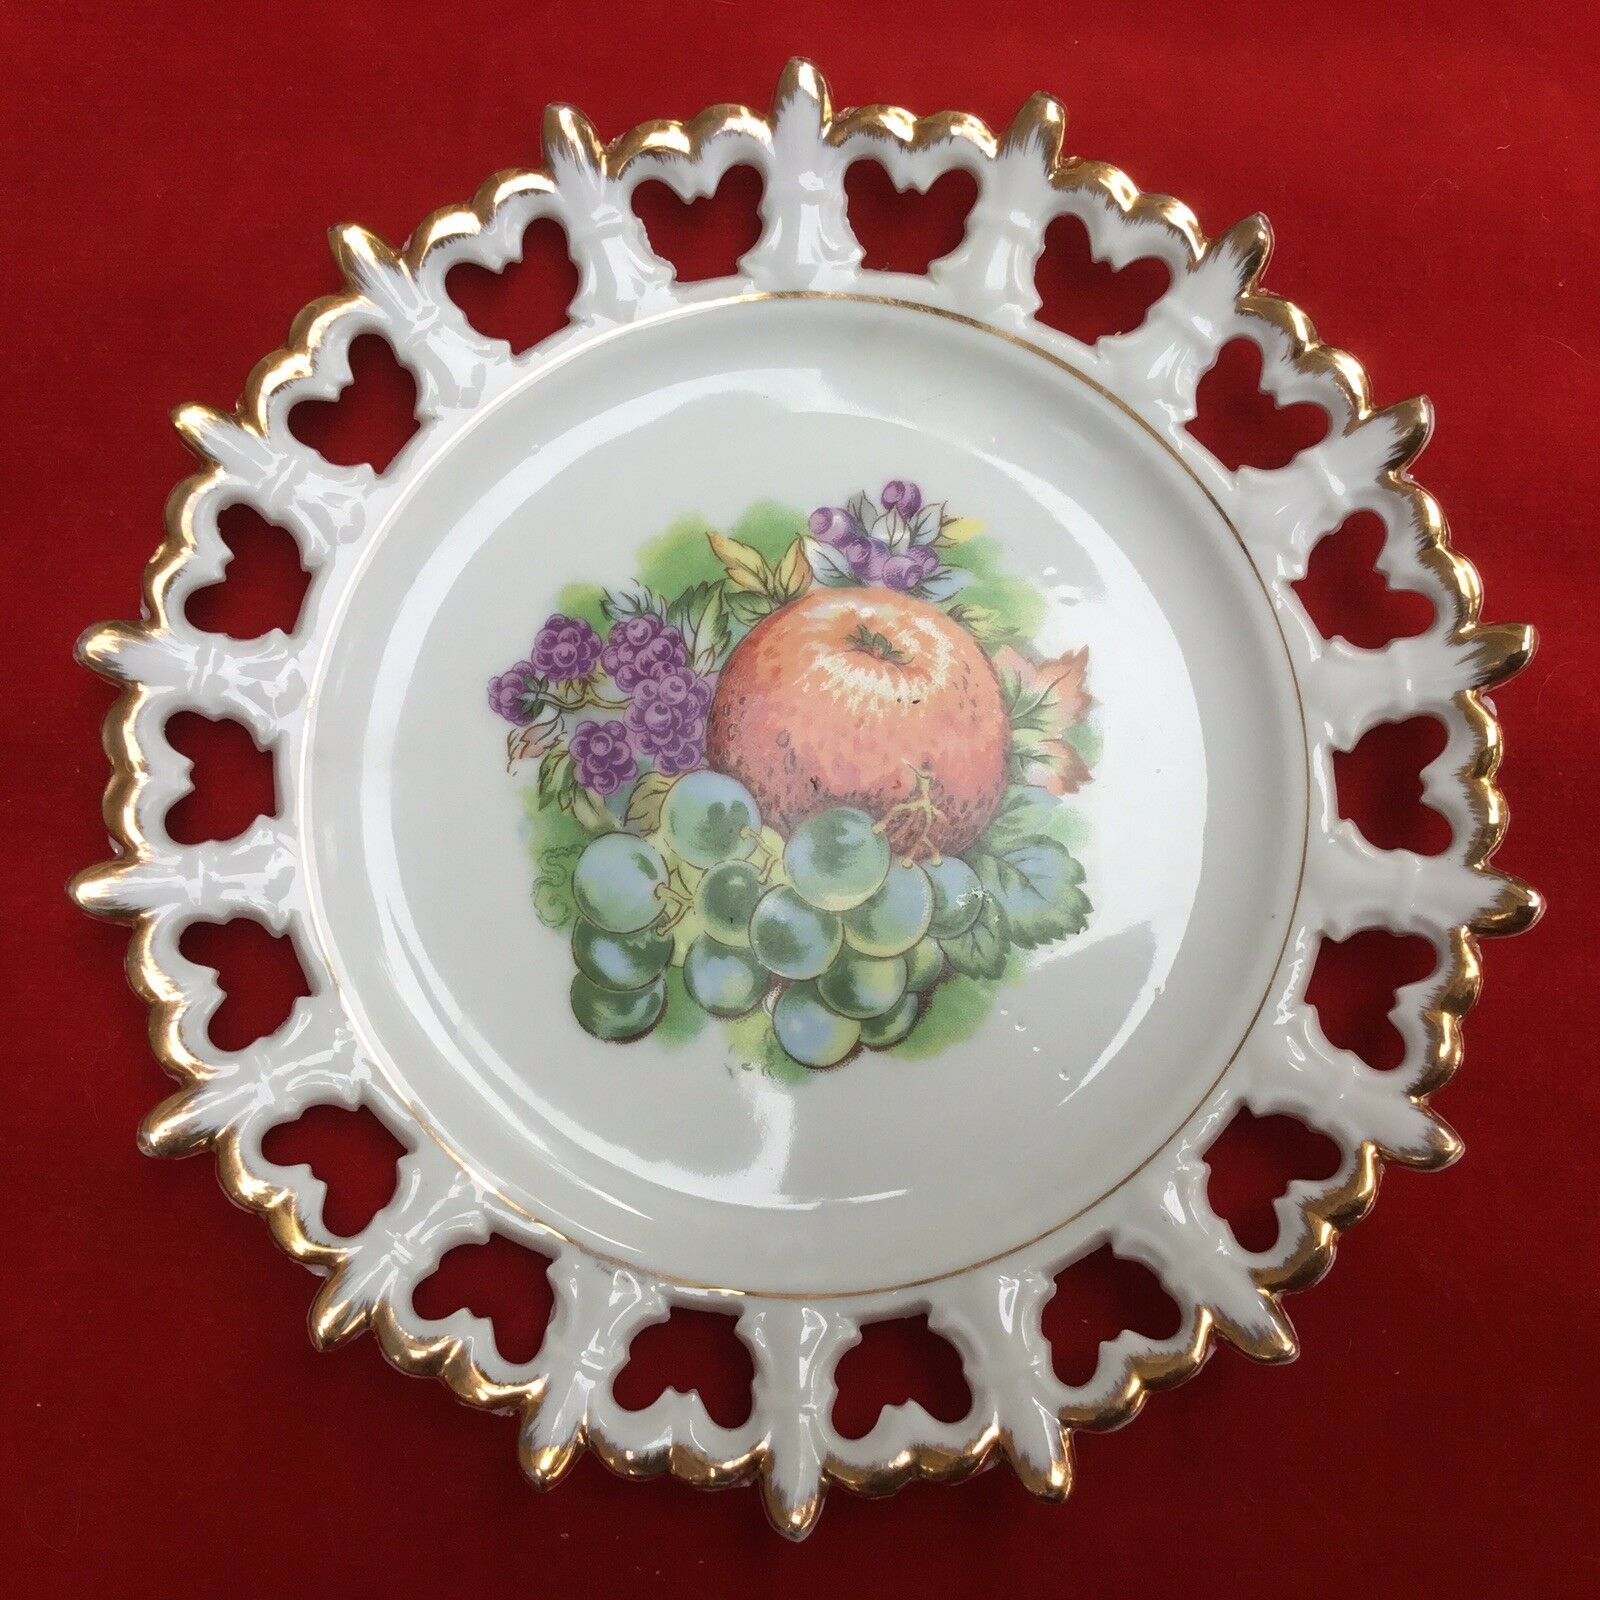 VINTAGE NAPCO RETICULATED HAND PAINTED DESSERT PLATE #S 903B JAPAN 8” WIDE 1960s - $18.70